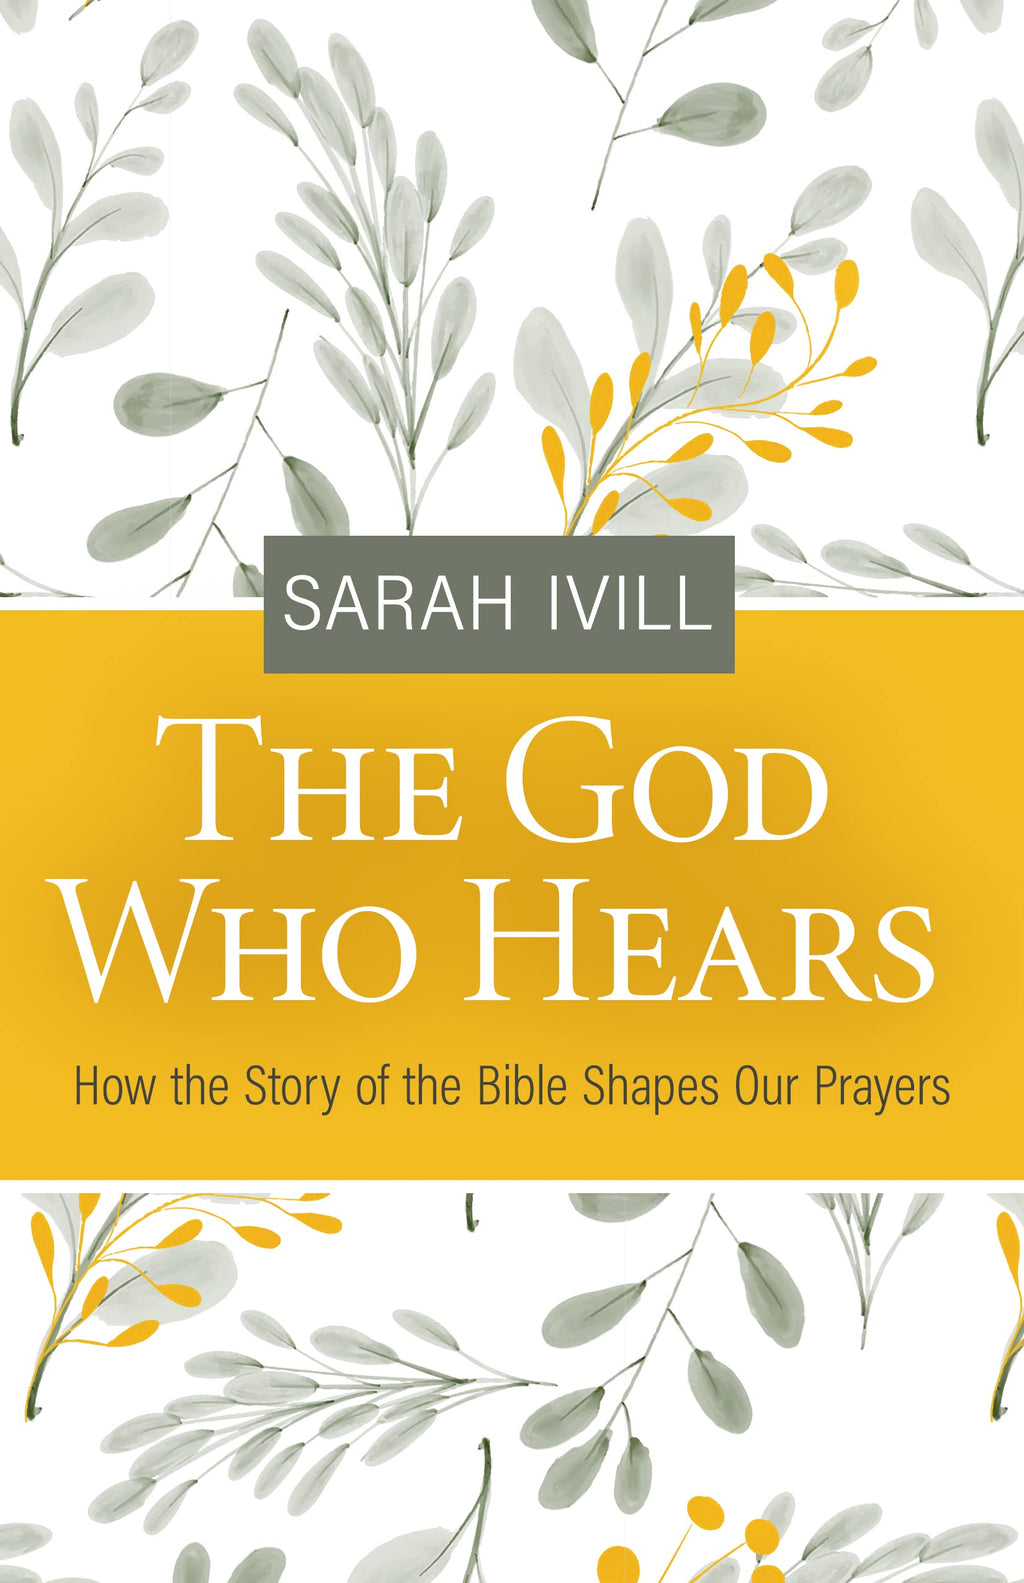 The　Prayers　Westminster　Bible　Shapes　–　of　Bookstore　God　the　How　Hears:　Who　Our　the　Story